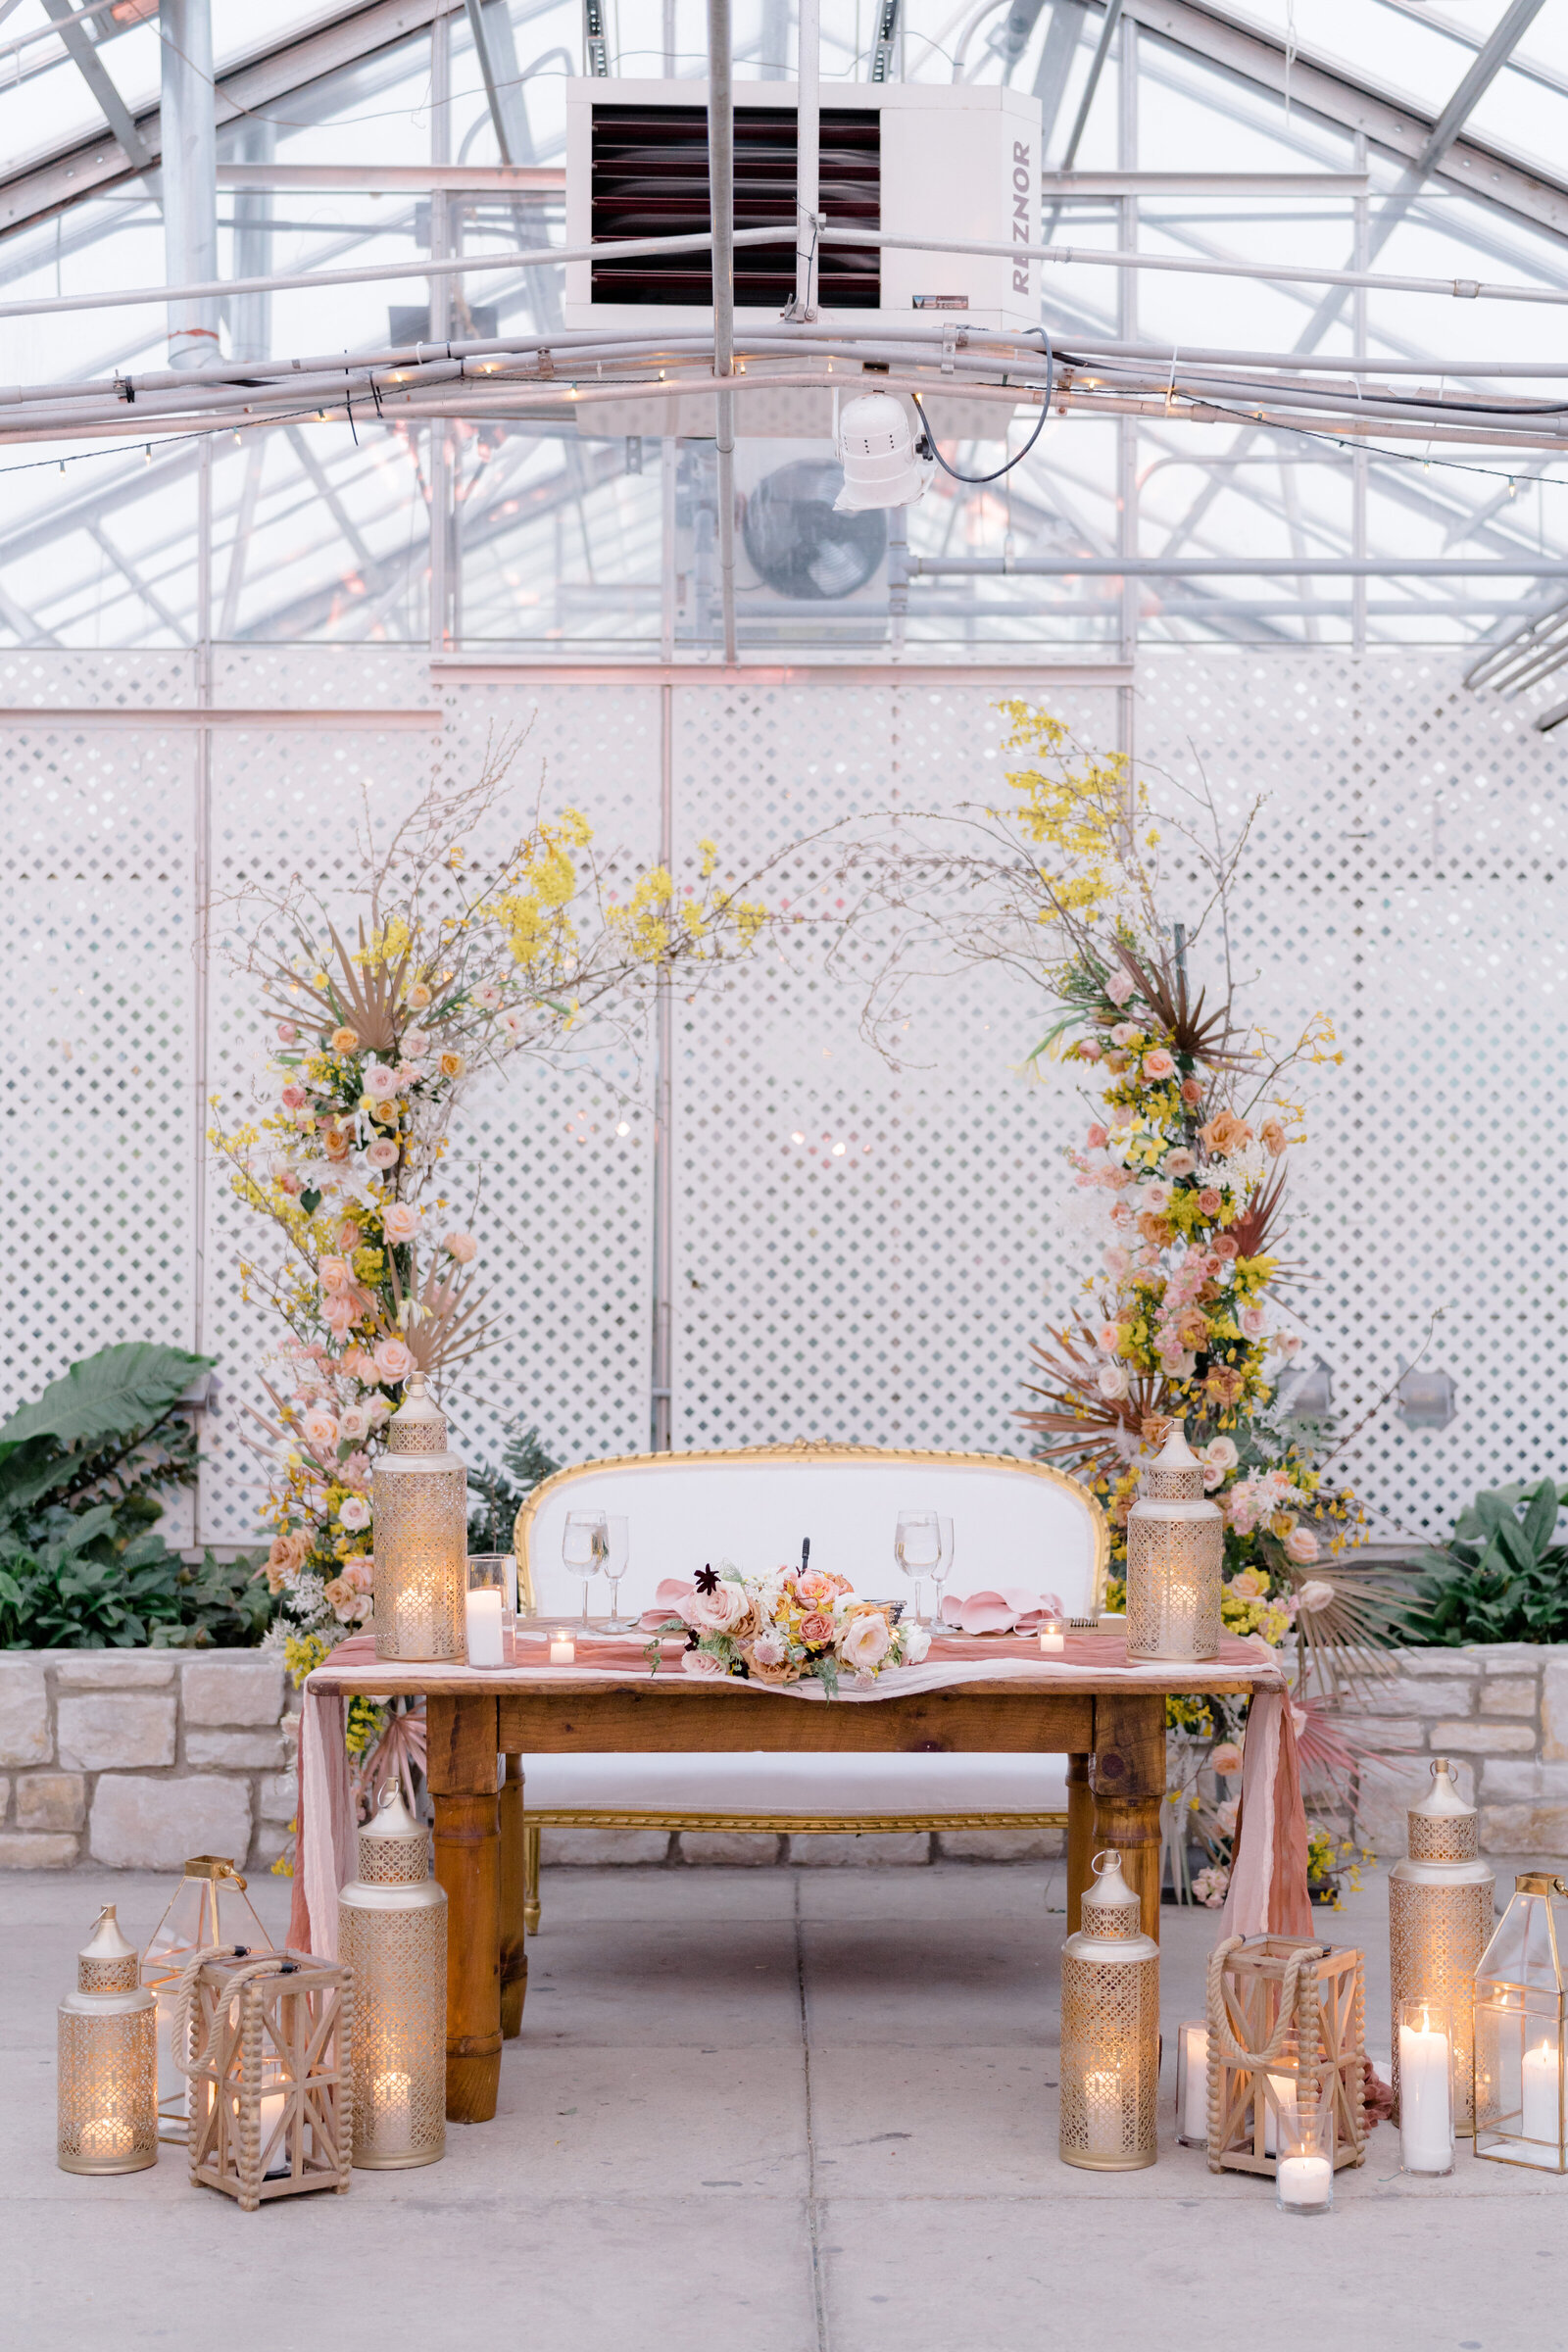 Melissa and Keith - Fairmount Park Horticulture Center - Magi Fisher - 739